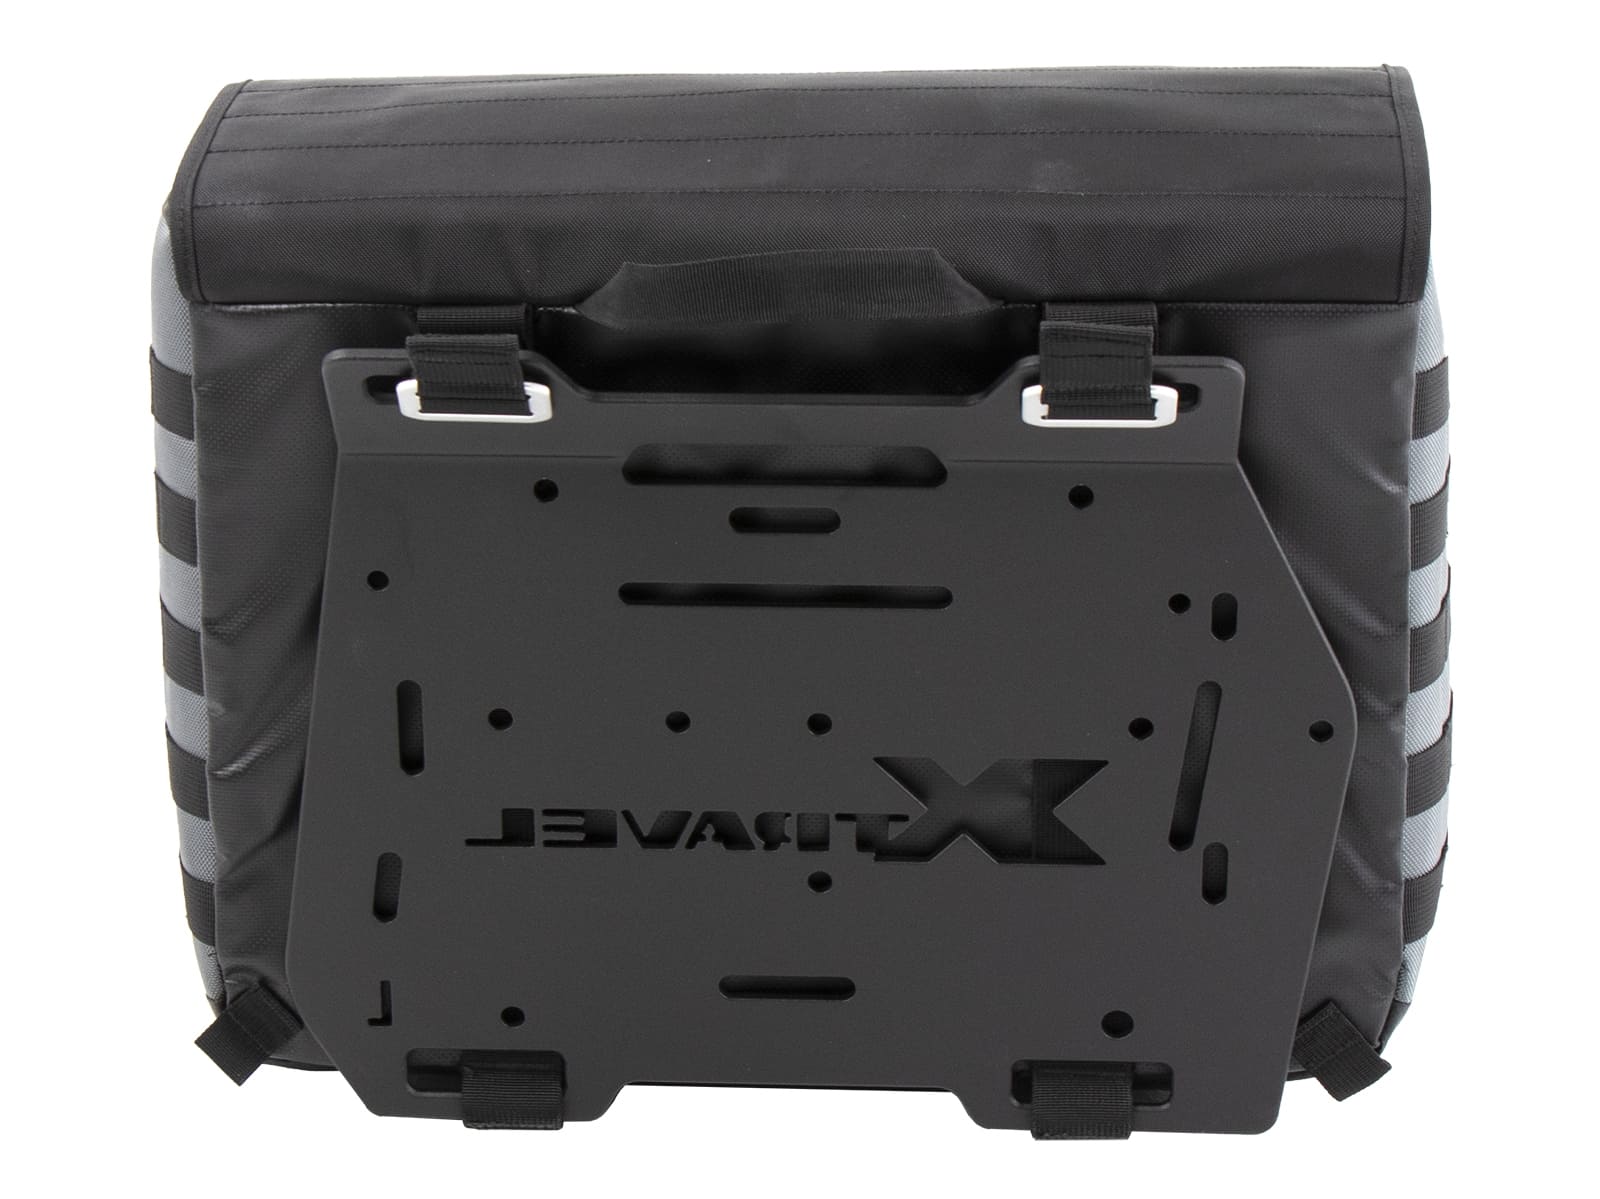 Sidebags Xtravel Basic incl. 2x universal holding plates for side carrier